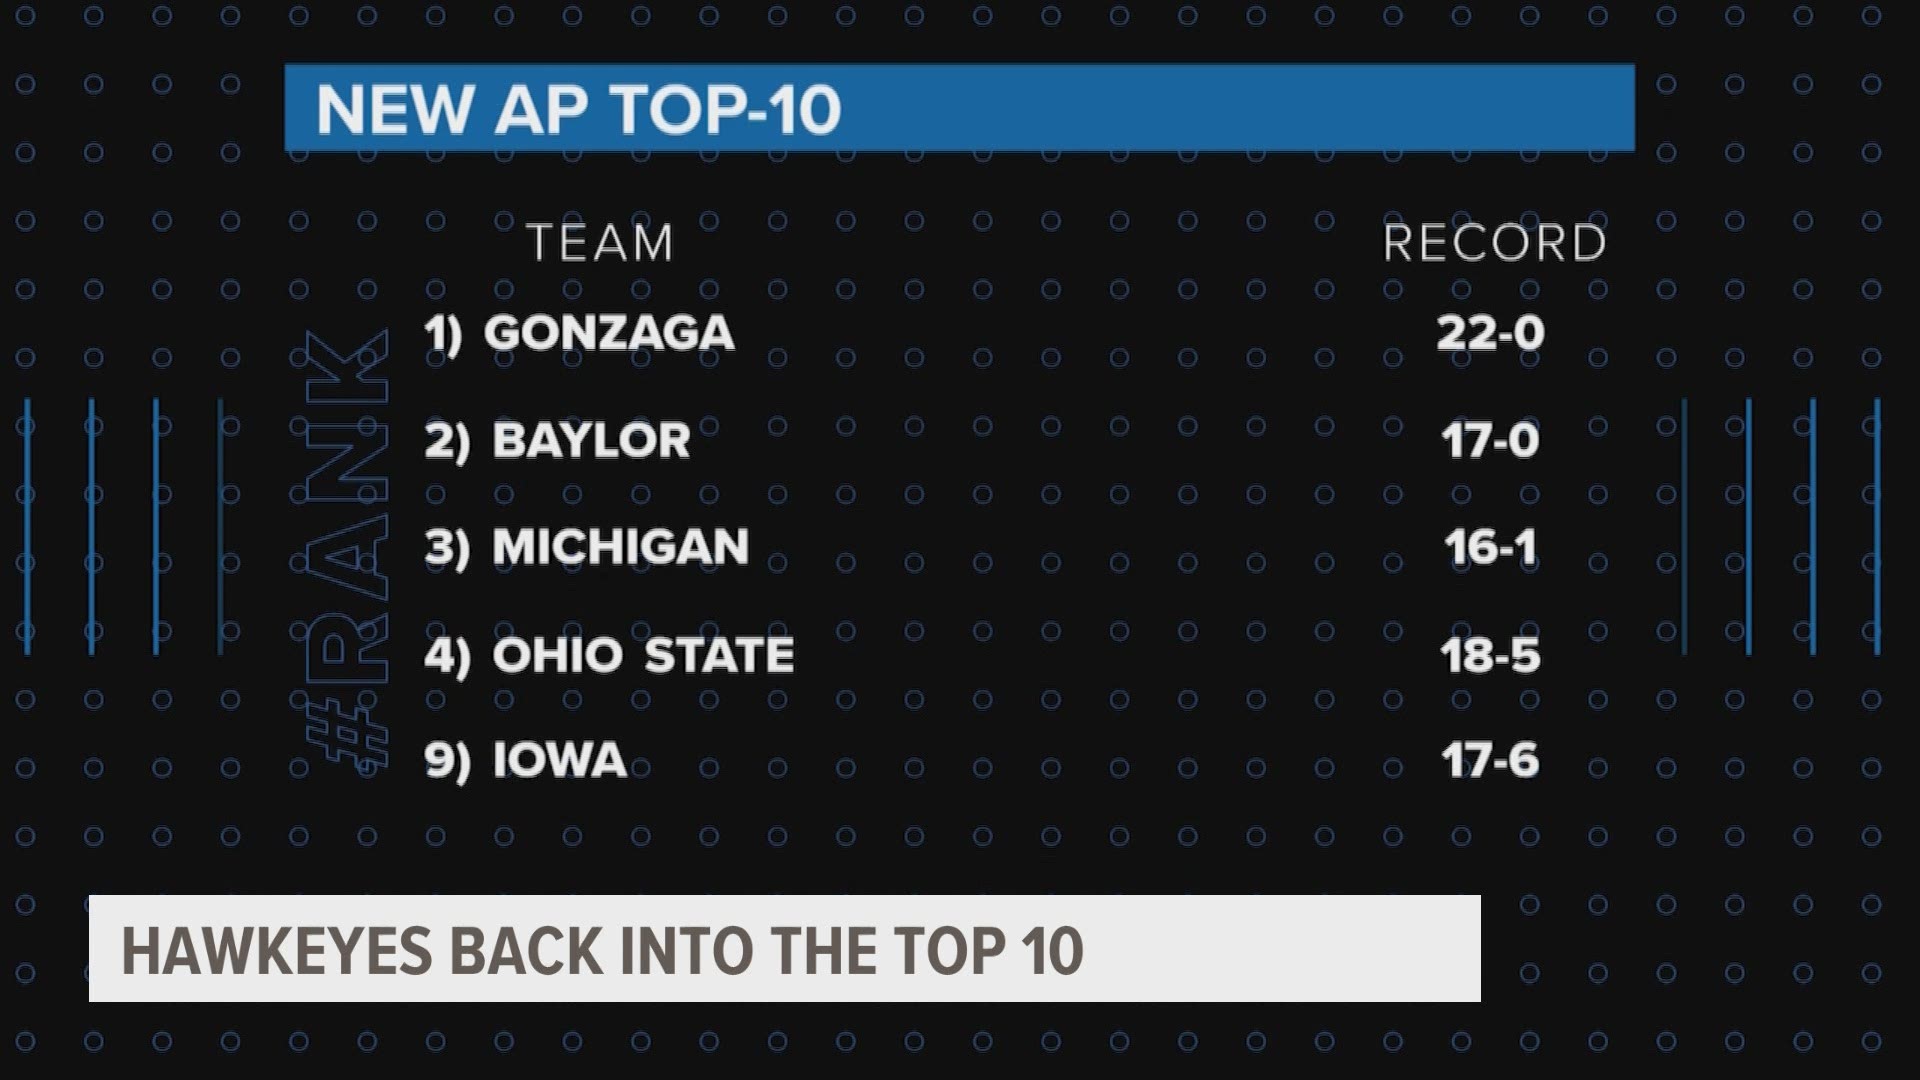 No new teams moved in or out of the poll this week, but there was a fair amount of movement among the top 25 teams in the AP poll.